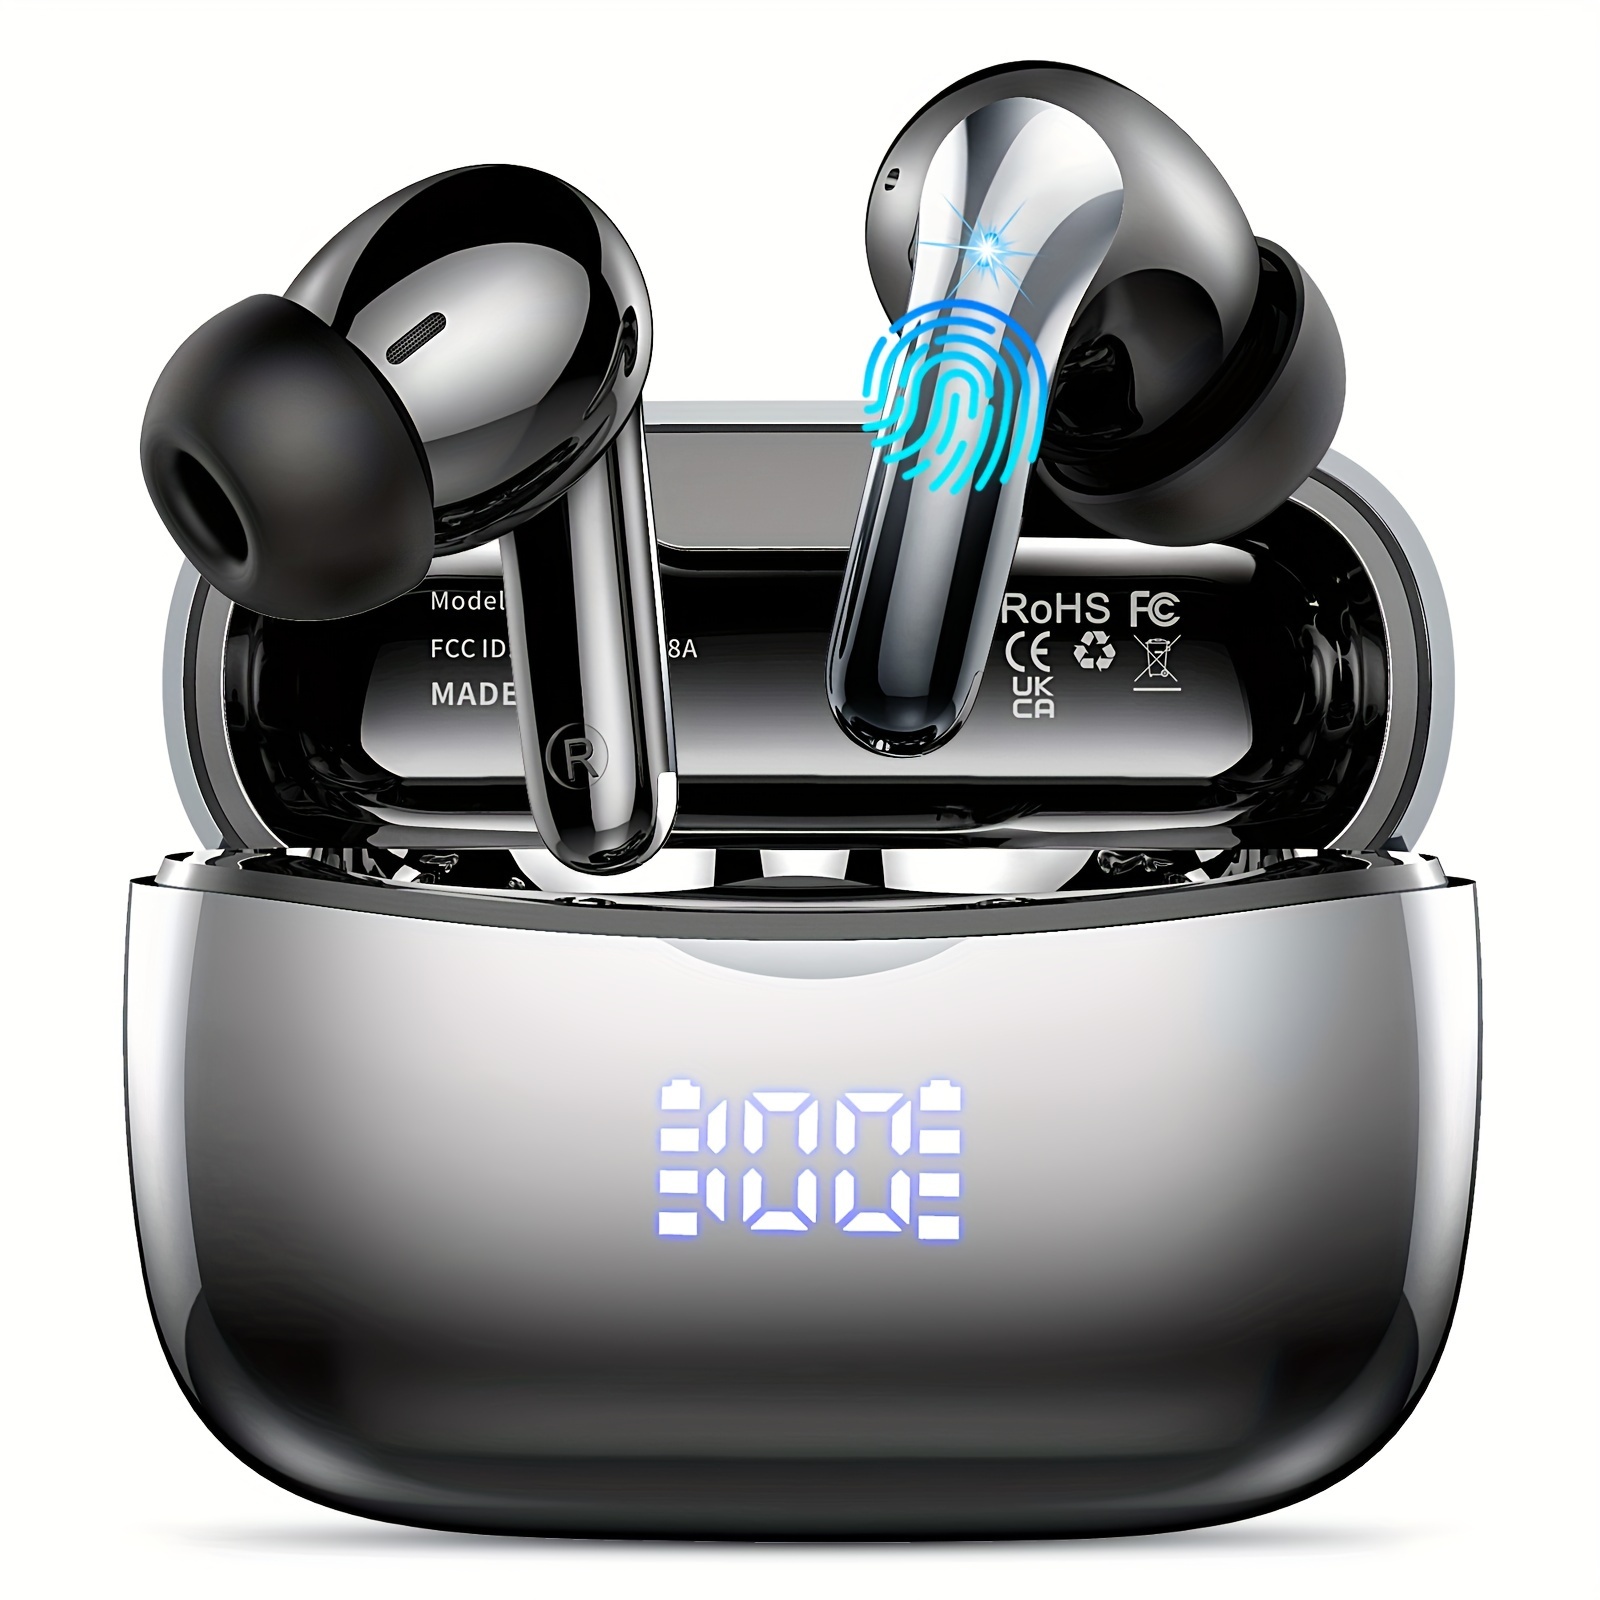 

Silver Wireless Earbuds, 5.3 Headphones With 4 Enc Noise Cancelling Mics, Hifi Stereo Deep Bass, 50h Playtime, Usb-c Charging, Perfect For Sports, Work, And Leisure